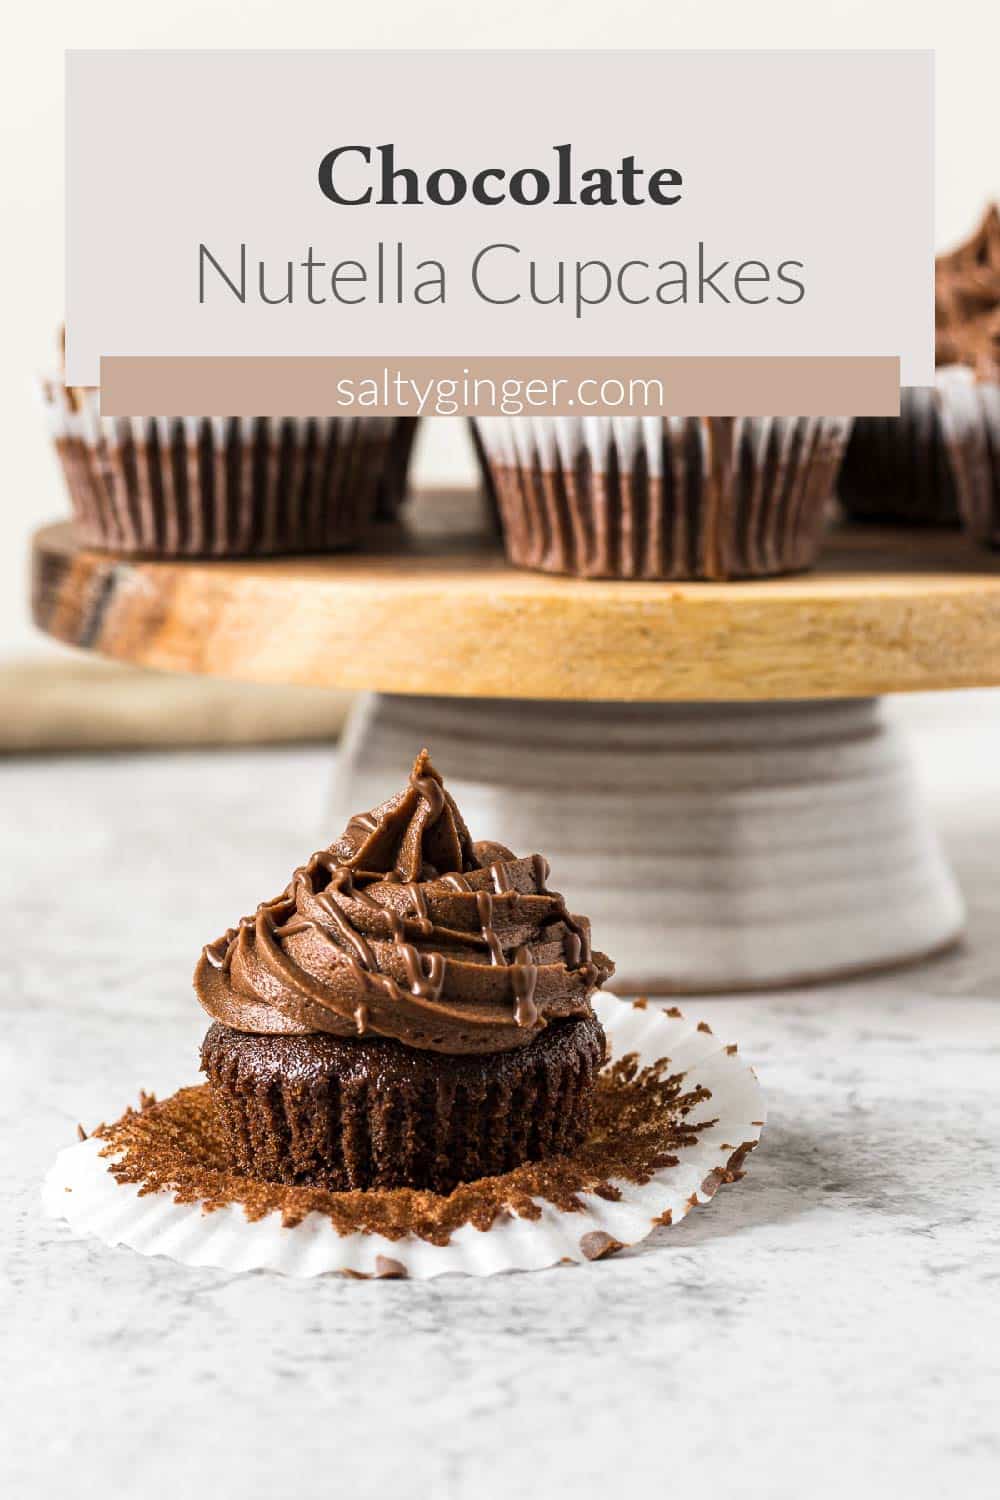 Frosted nutella cupcake with a Nutella drizzle.